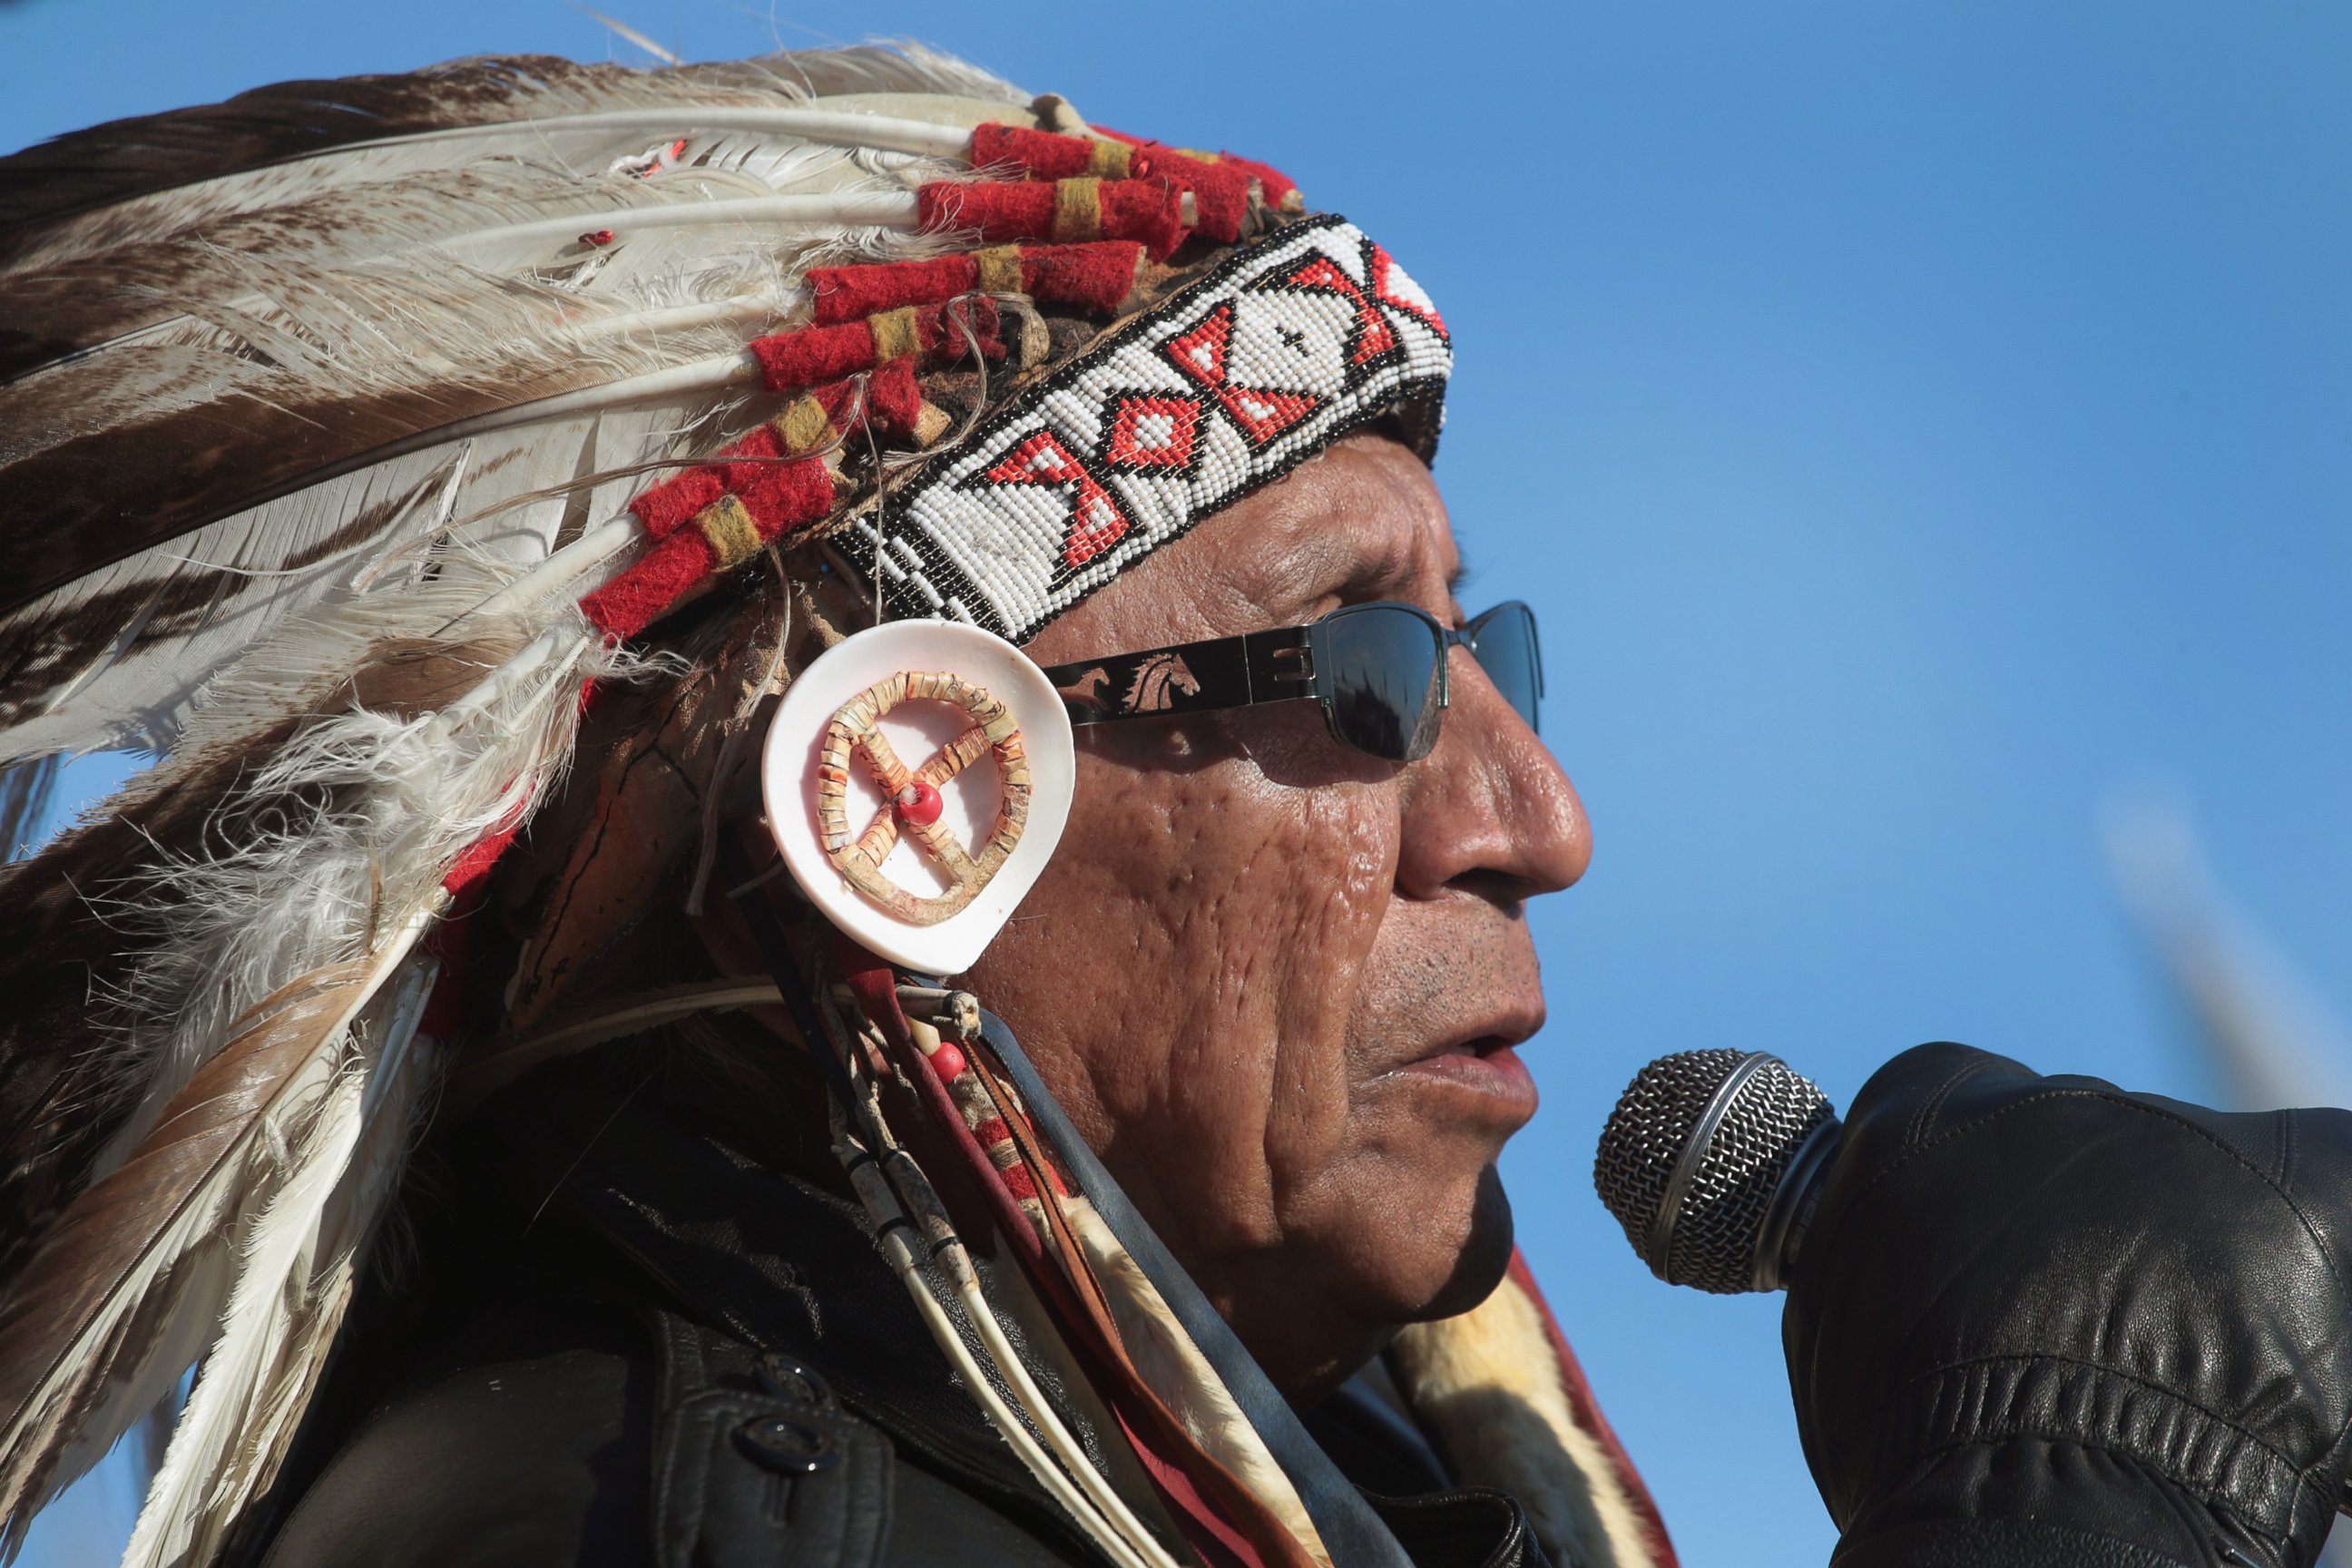 PHOTO: Chief Arvol Looking Horse of the Lakota/Dakota/Nakota Nation speaks during an interfaith ceremony at Oceti Sakowin Camp on the edge of the Standing Rock Sioux Reservation, Dec. 4, 2016 outside Cannon Ball, North Dakota.